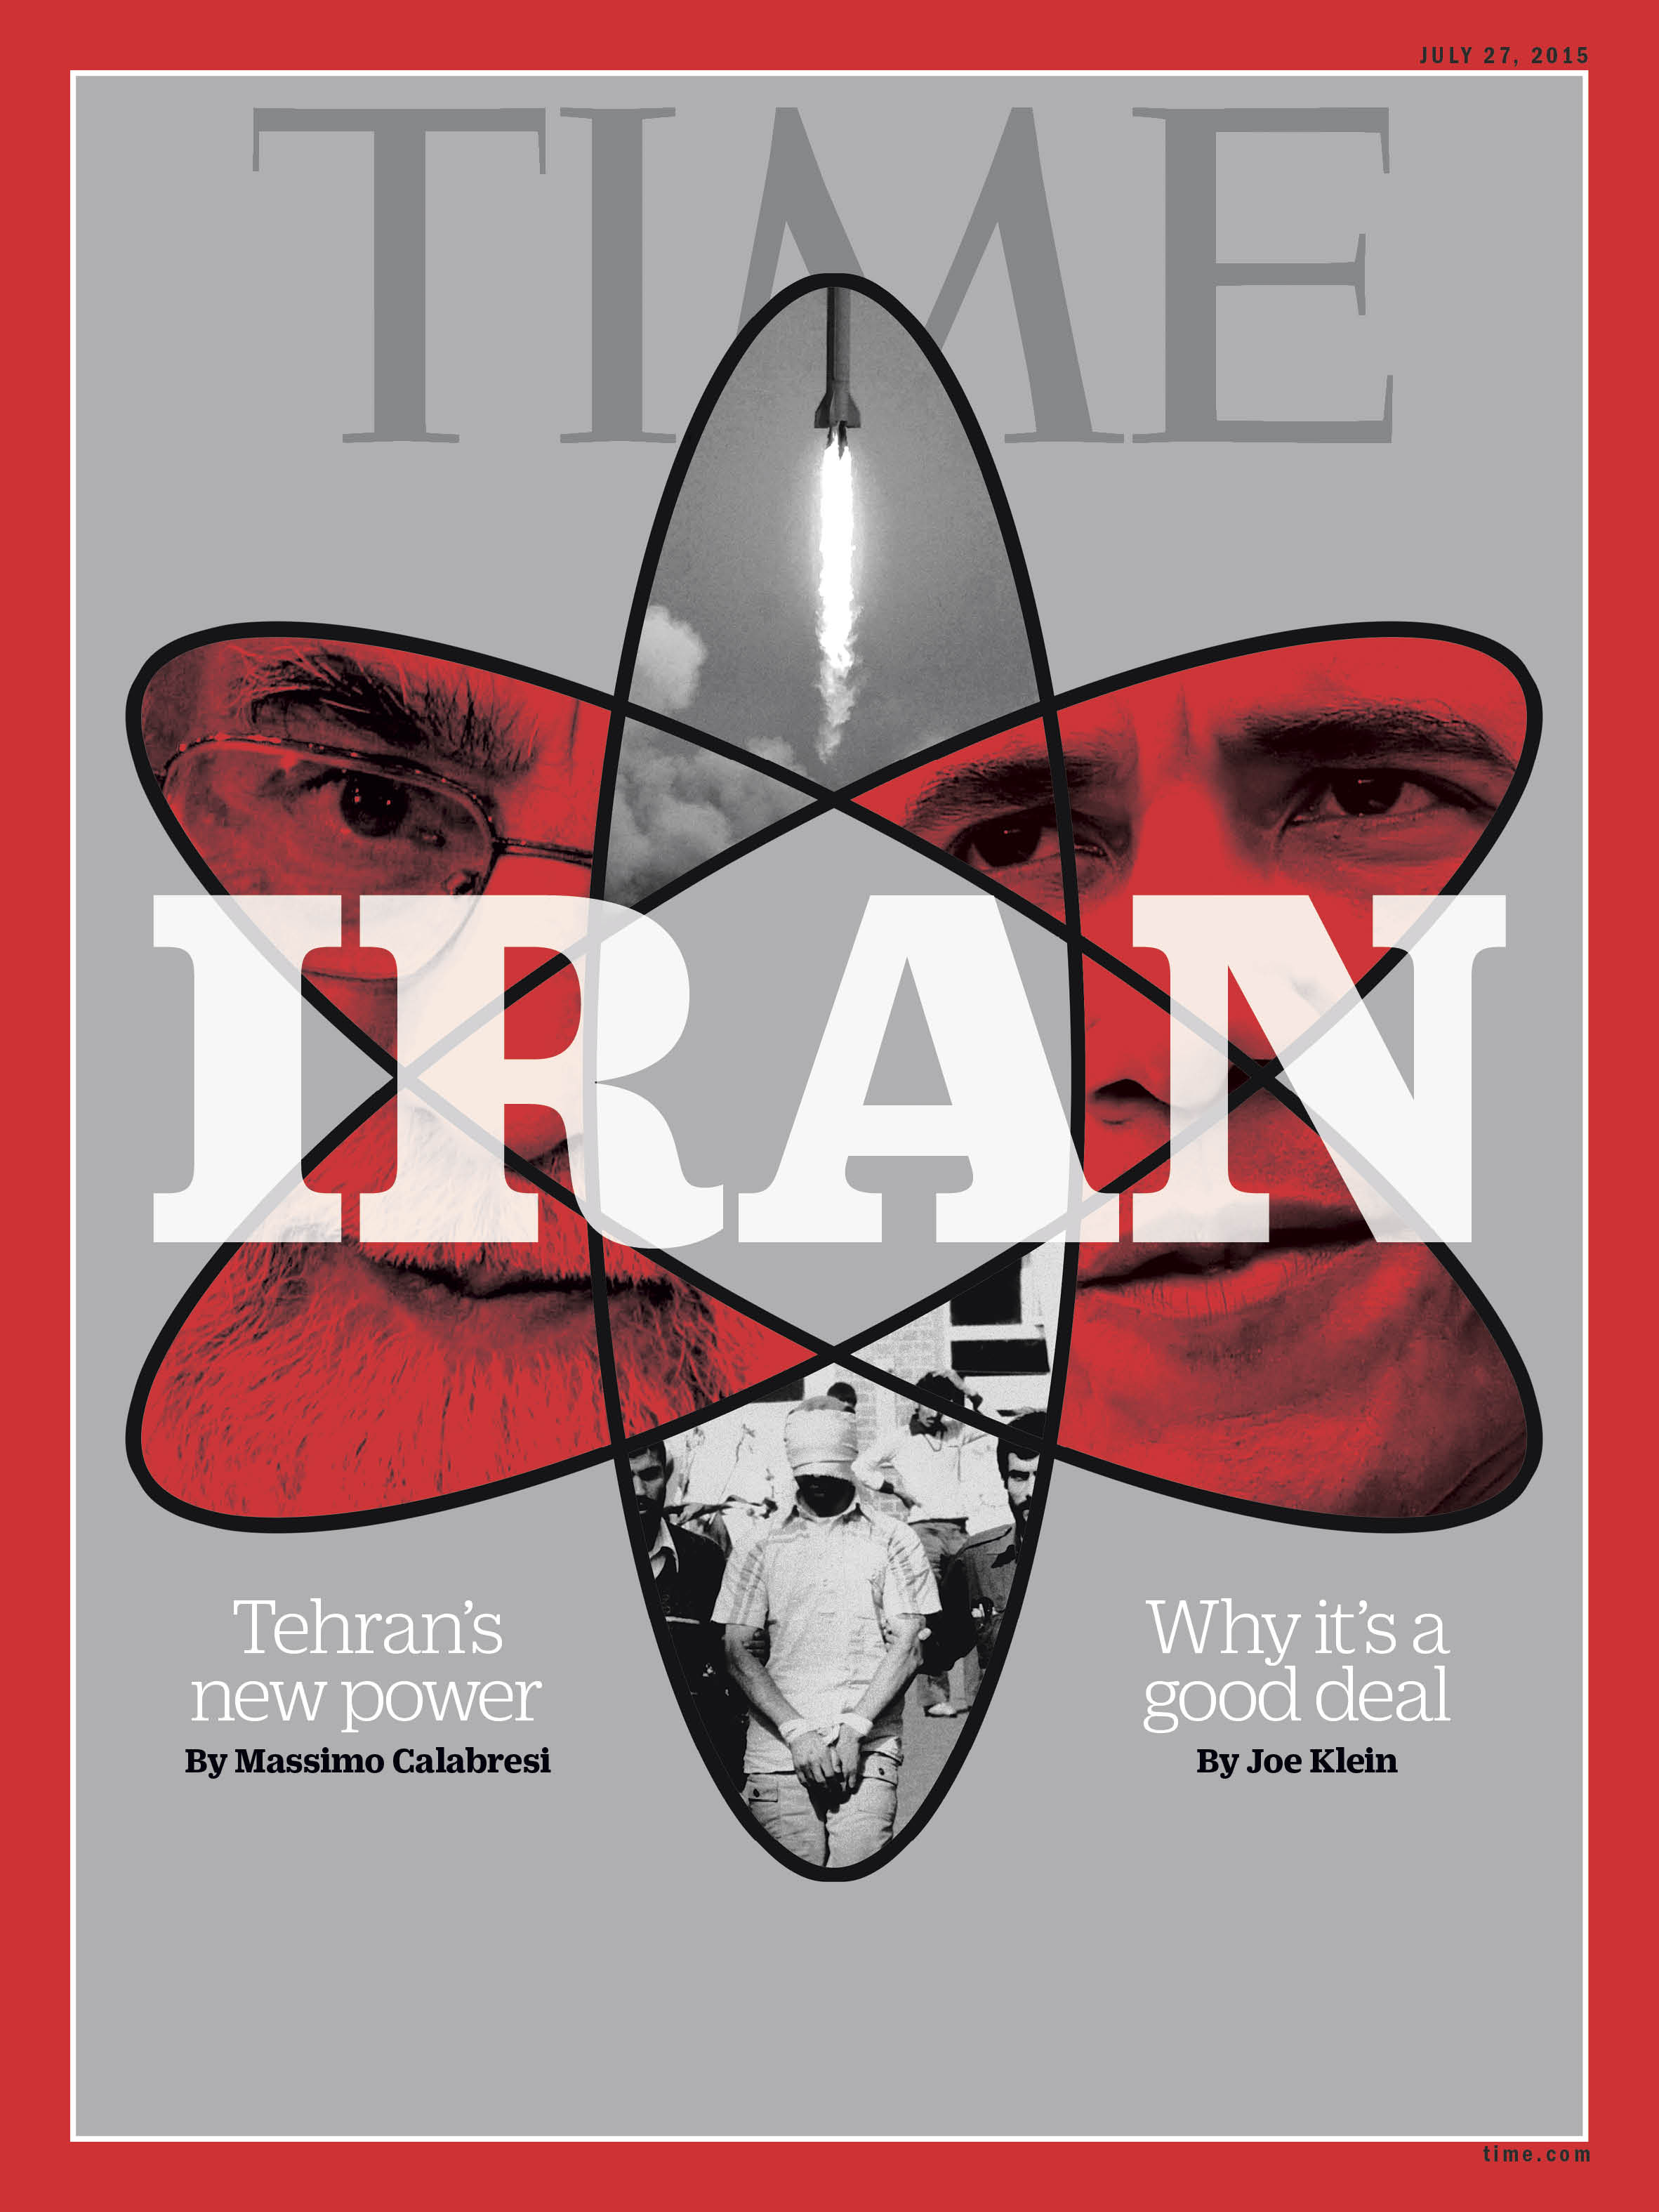 Iran Nuclear Deal Time Magazine Cover